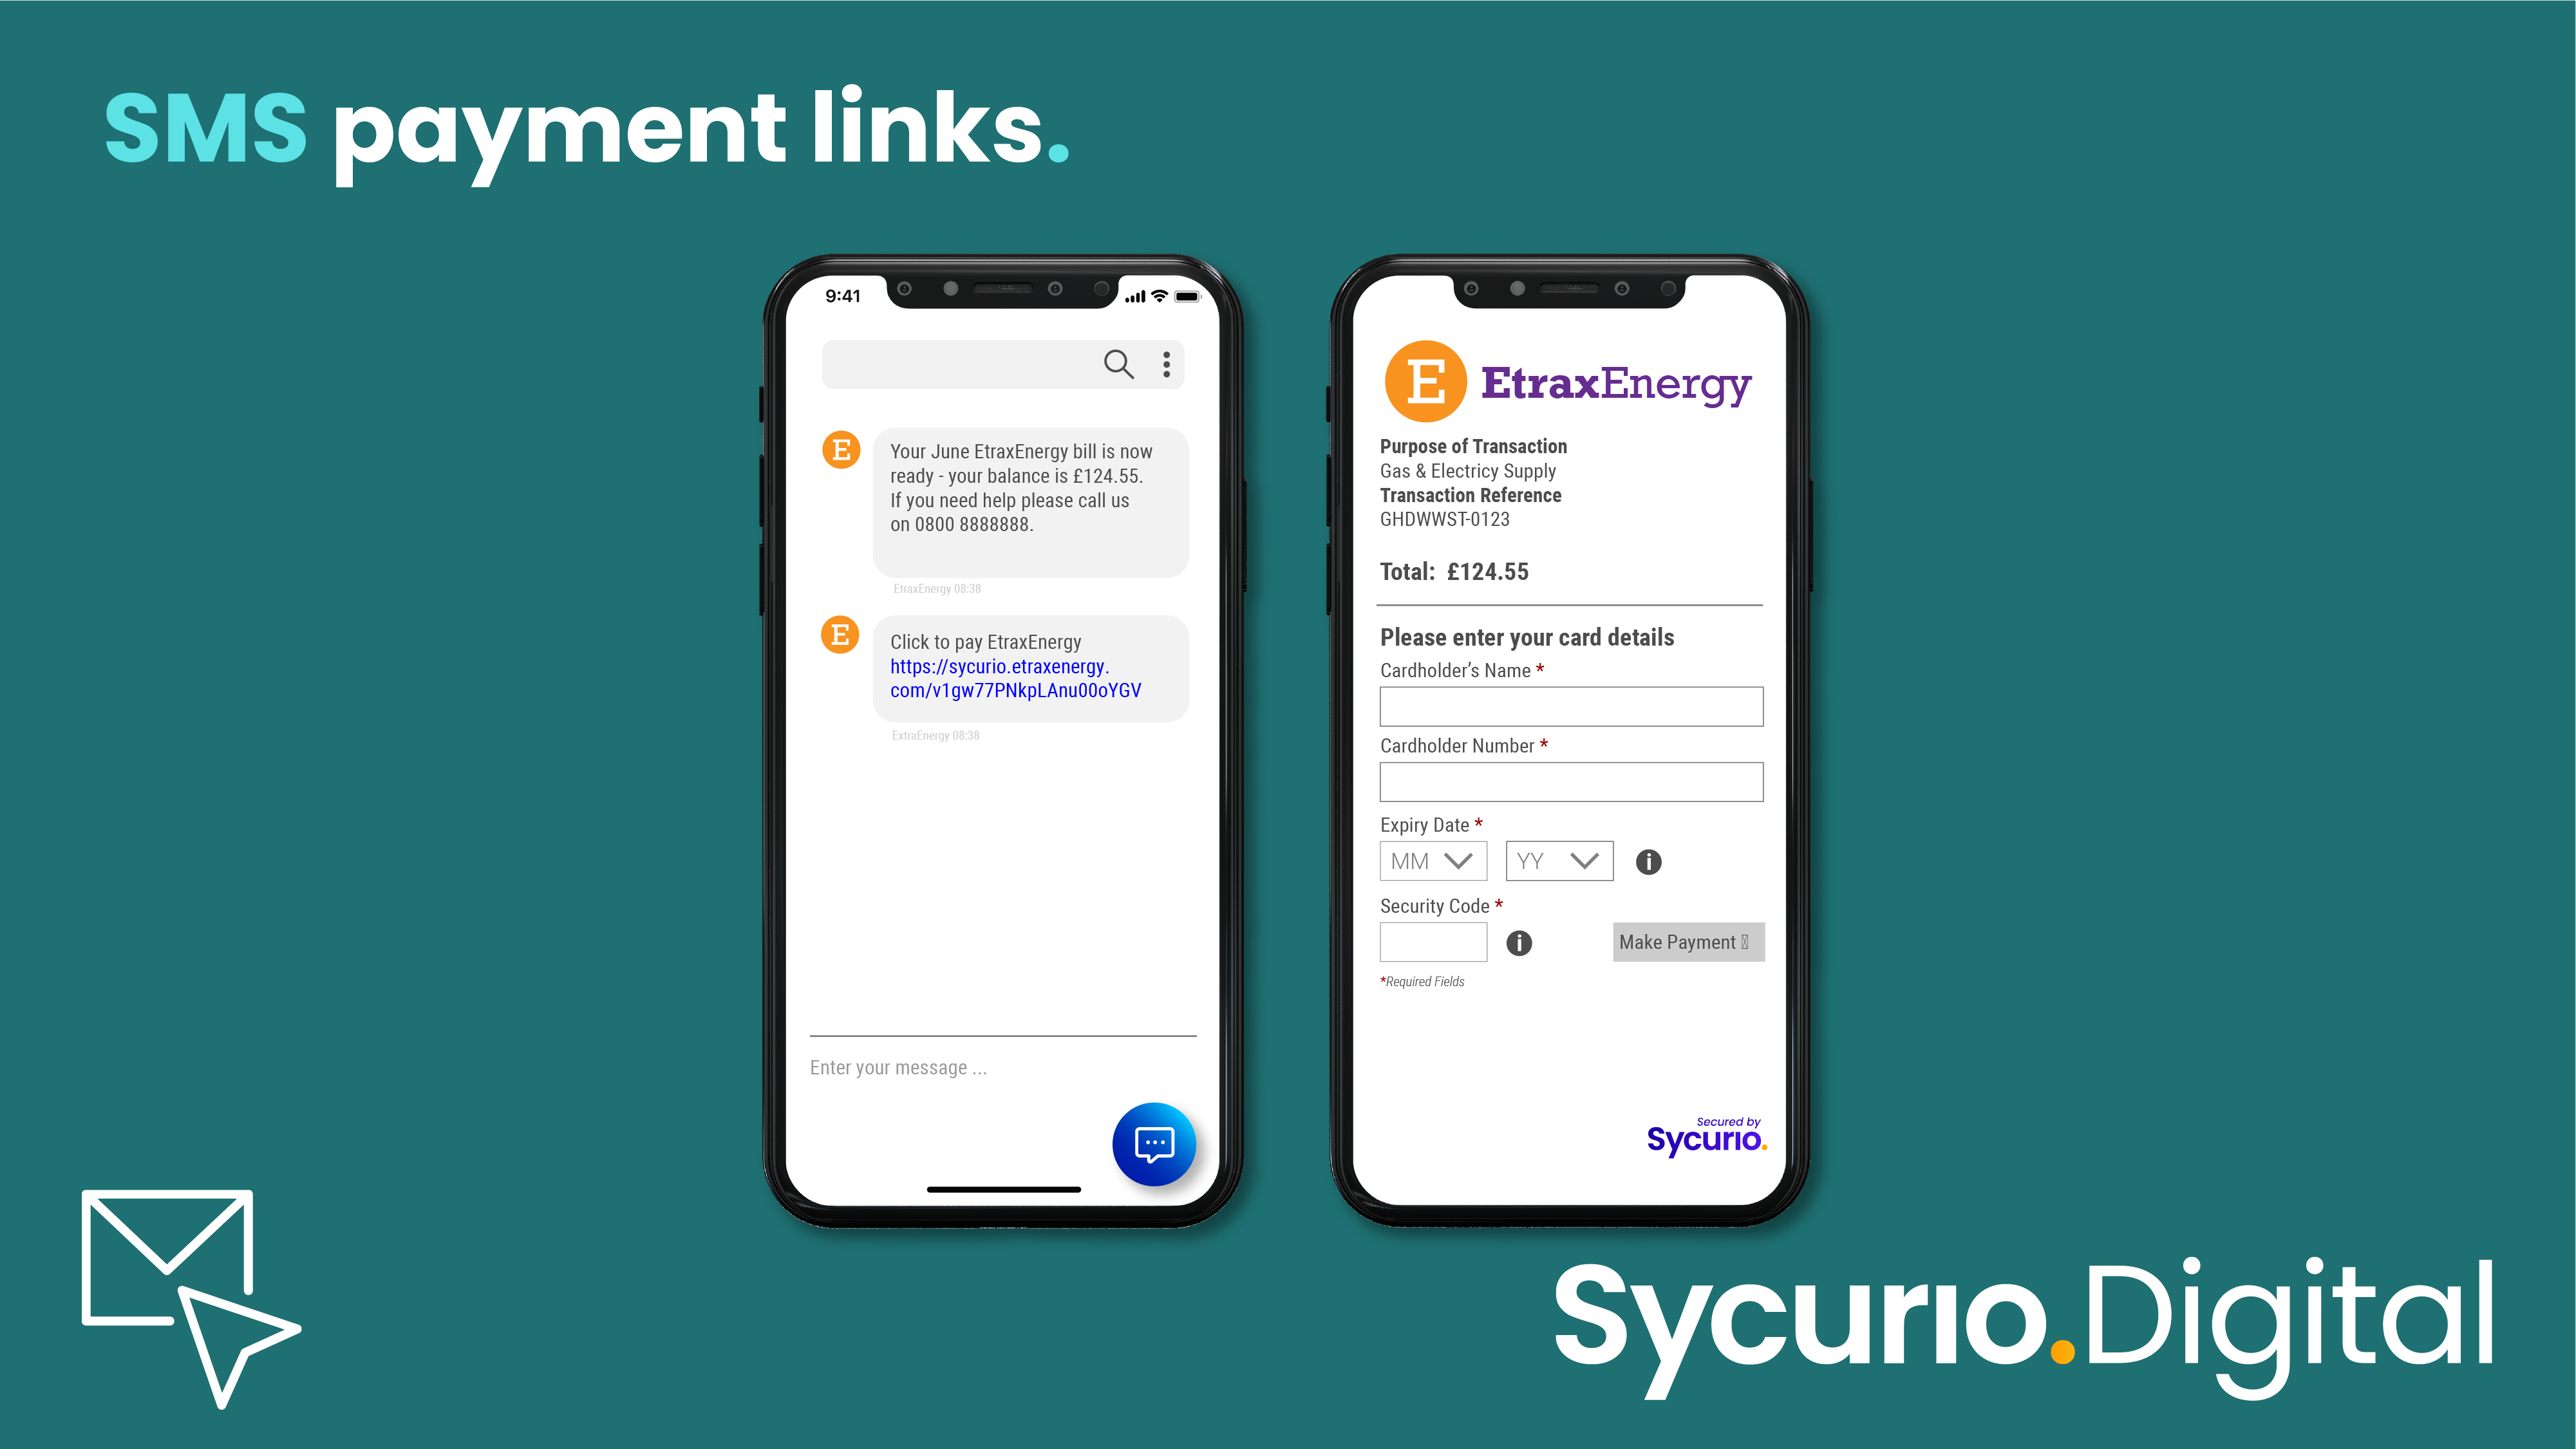 Sycurio.Digital Omnichannel Payment Links SMS payment link integrations